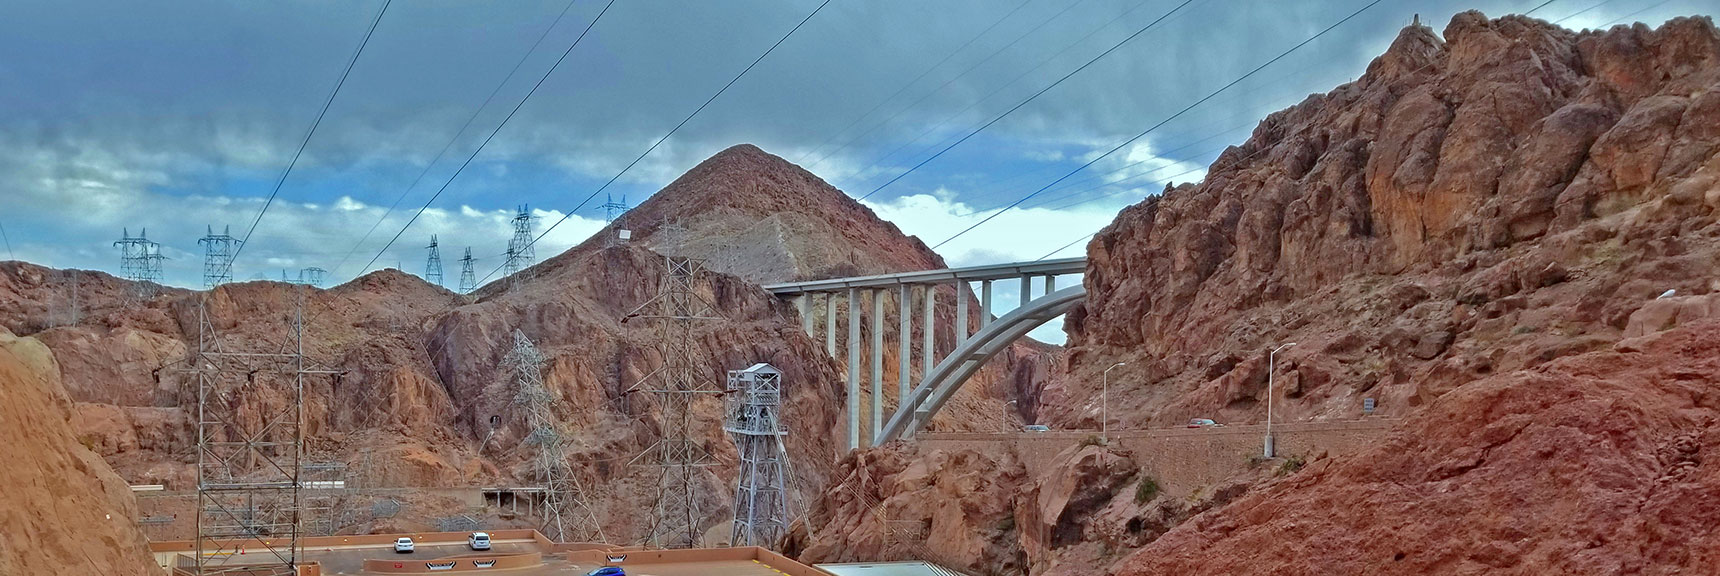 Memorial Highway Bridge from Hoover Dam Parking Area | Historic Railroad Trail | Lake Mead National Recreation Area, Nevada